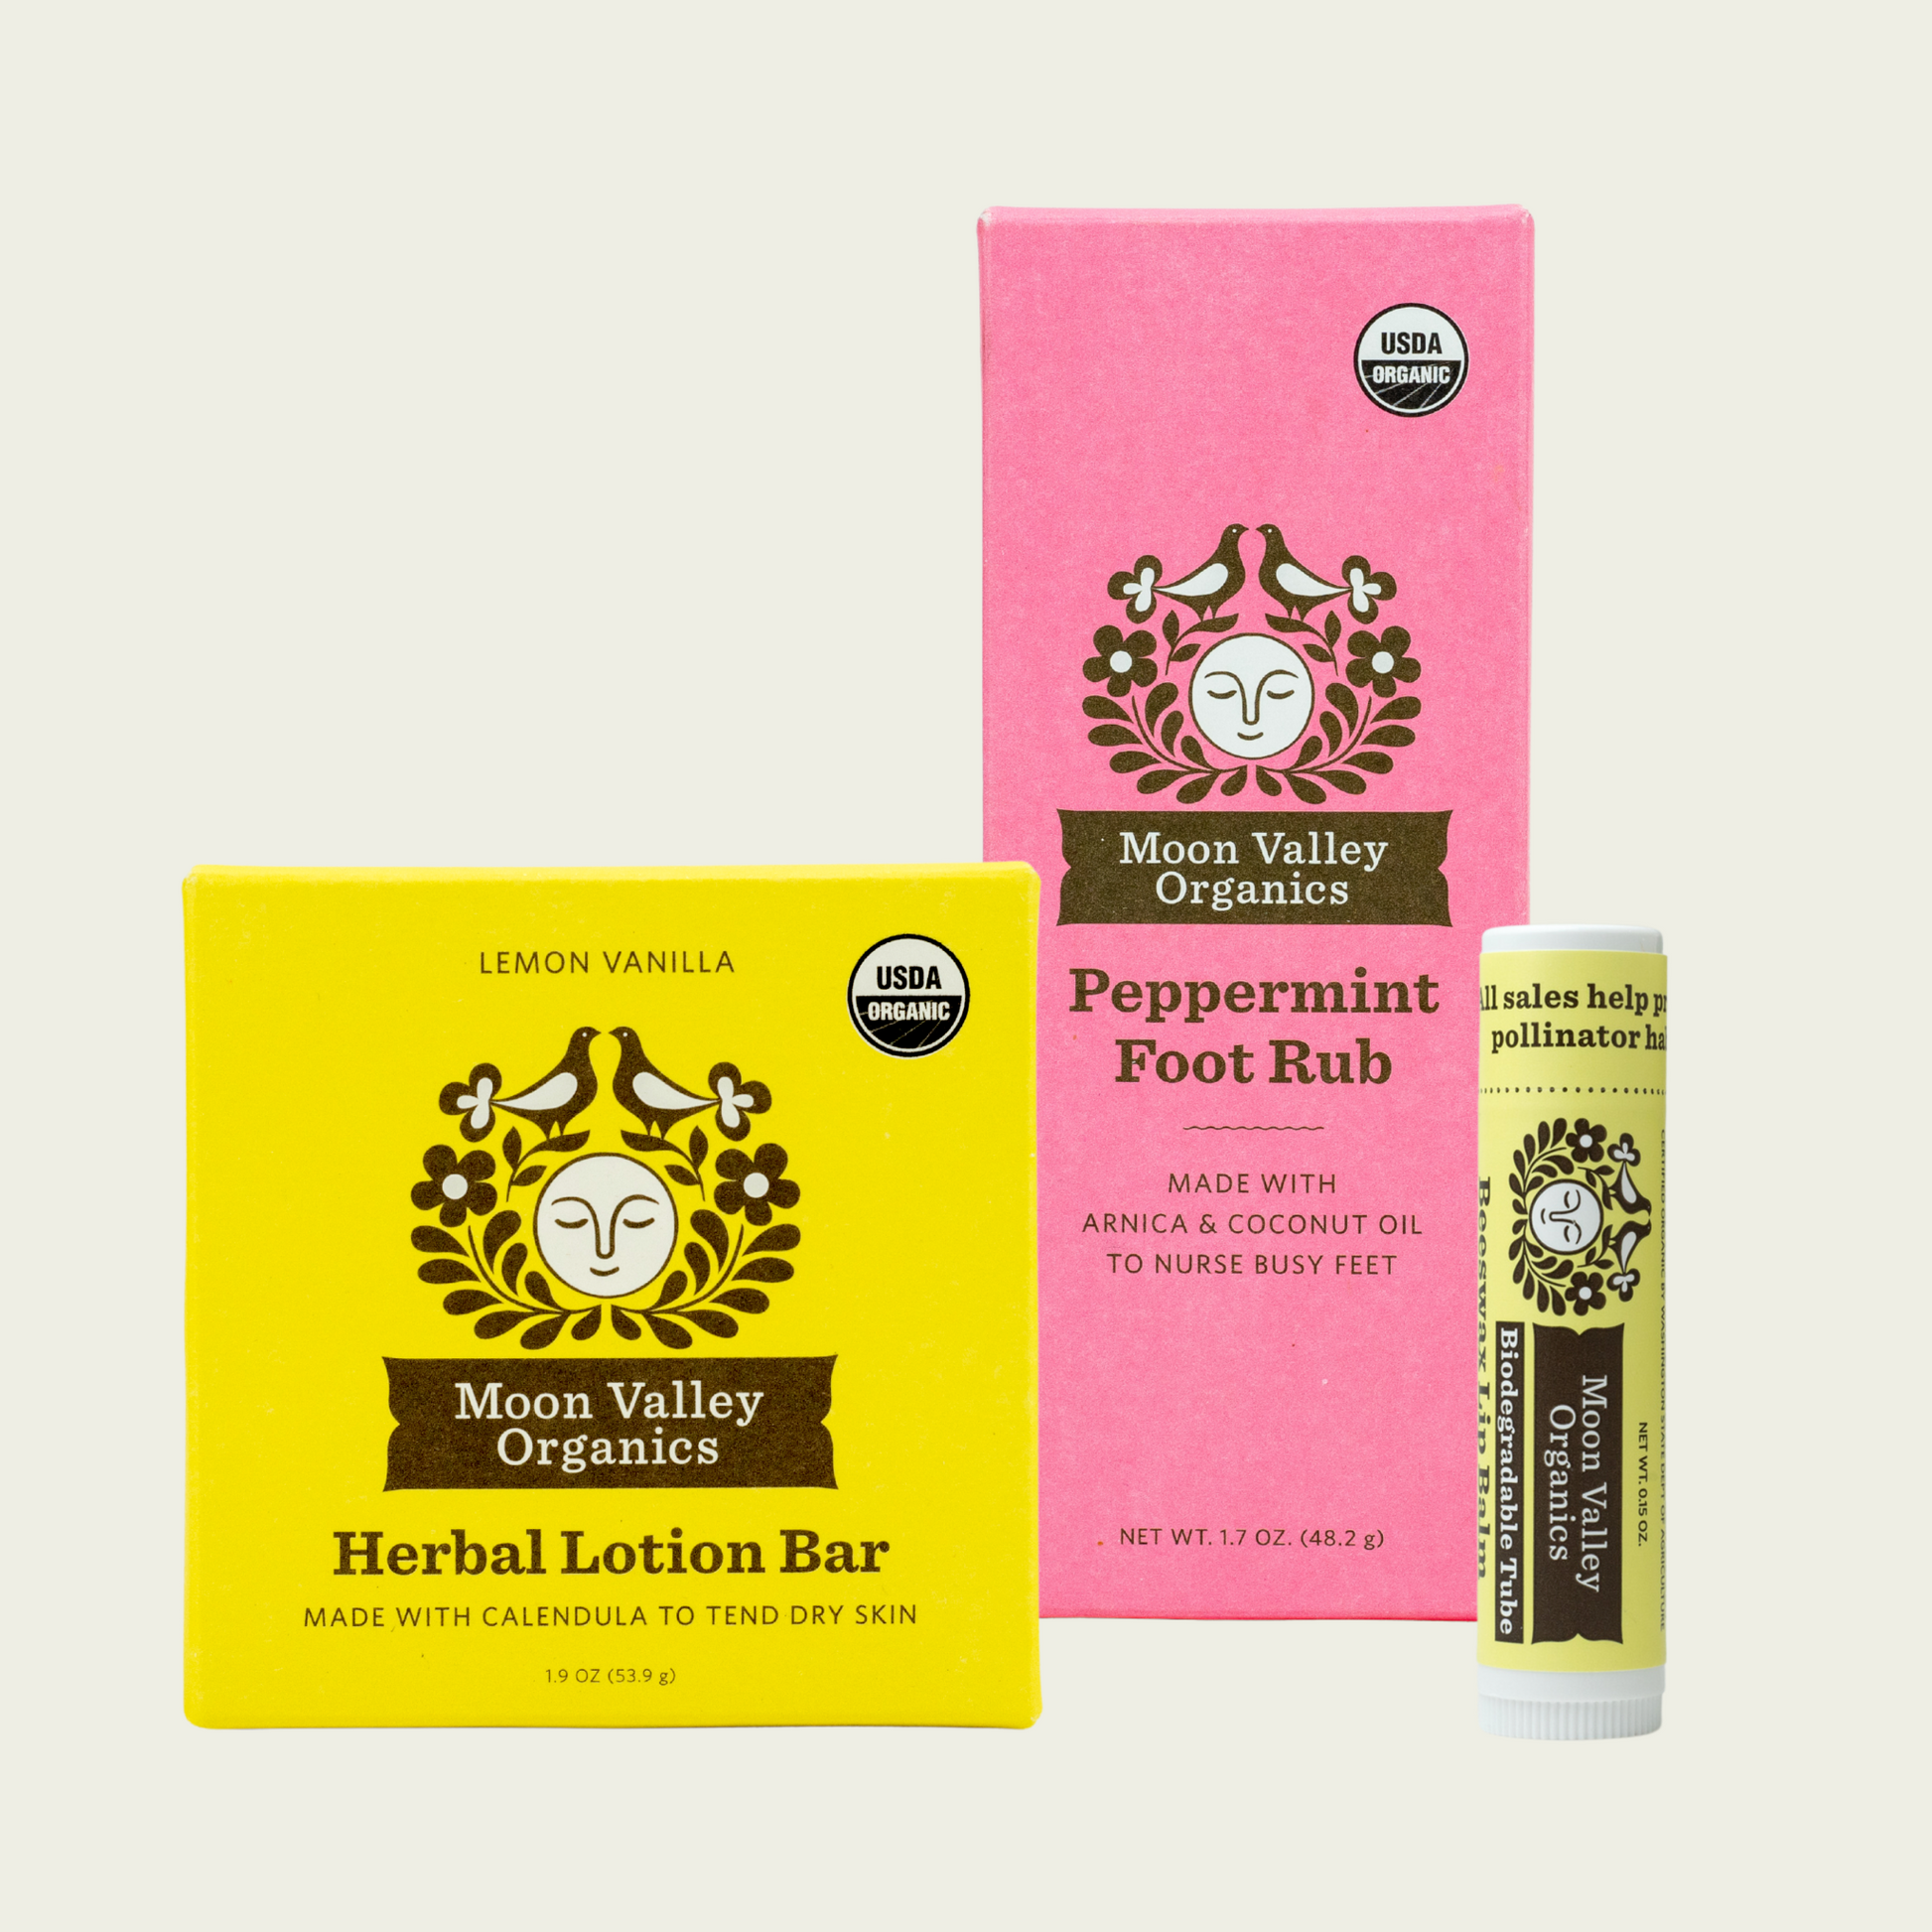 Moon Valley Organics Natural Body Collection Peppermint Foot Rub with Lip Balm and Lotion Bar Front Boxes